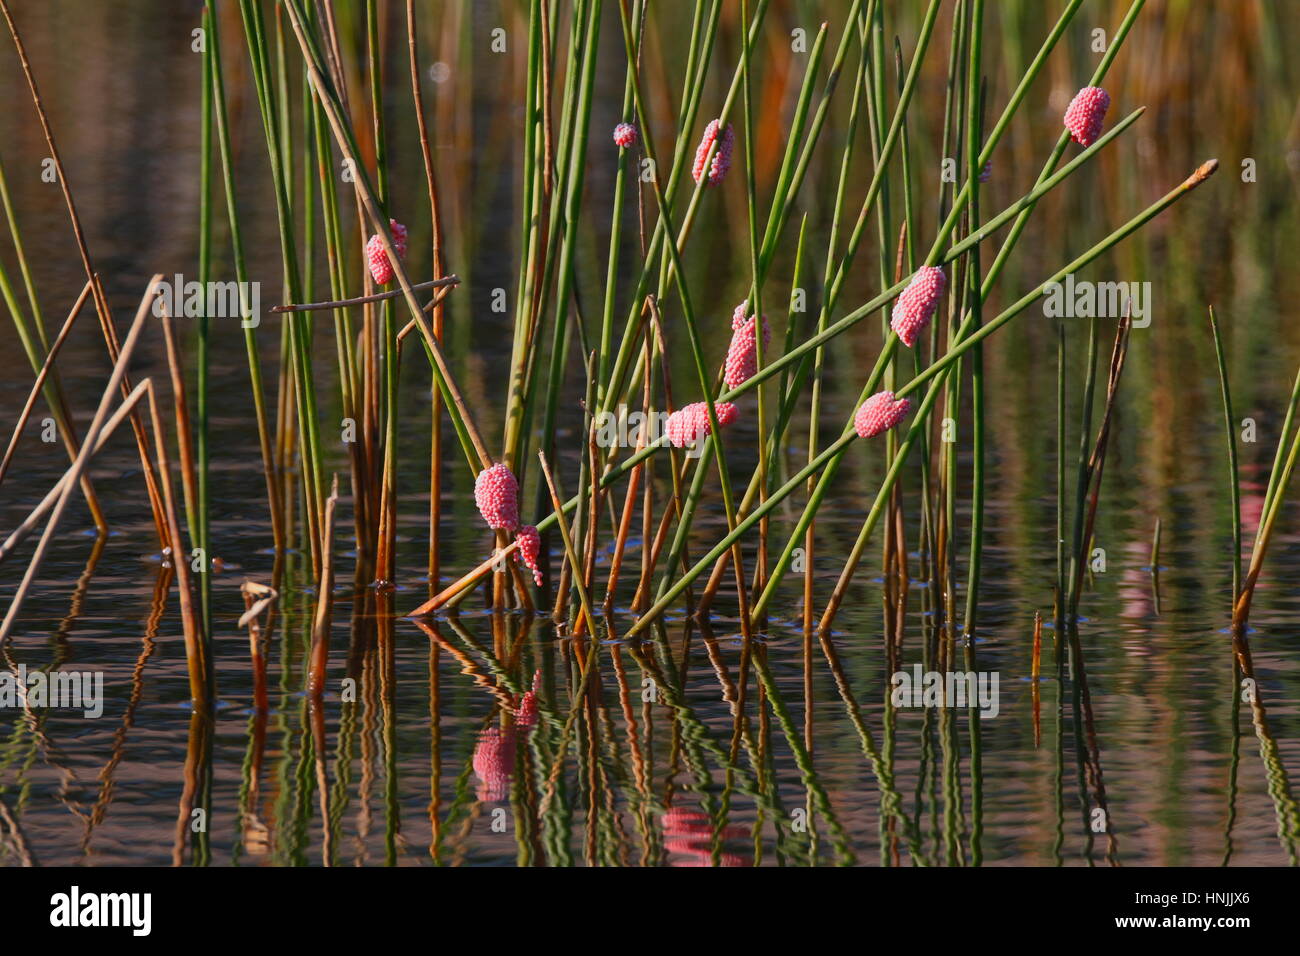 Florida apple snail, Pomacea paludosa, egg clusters attached to reeds. Stock Photo